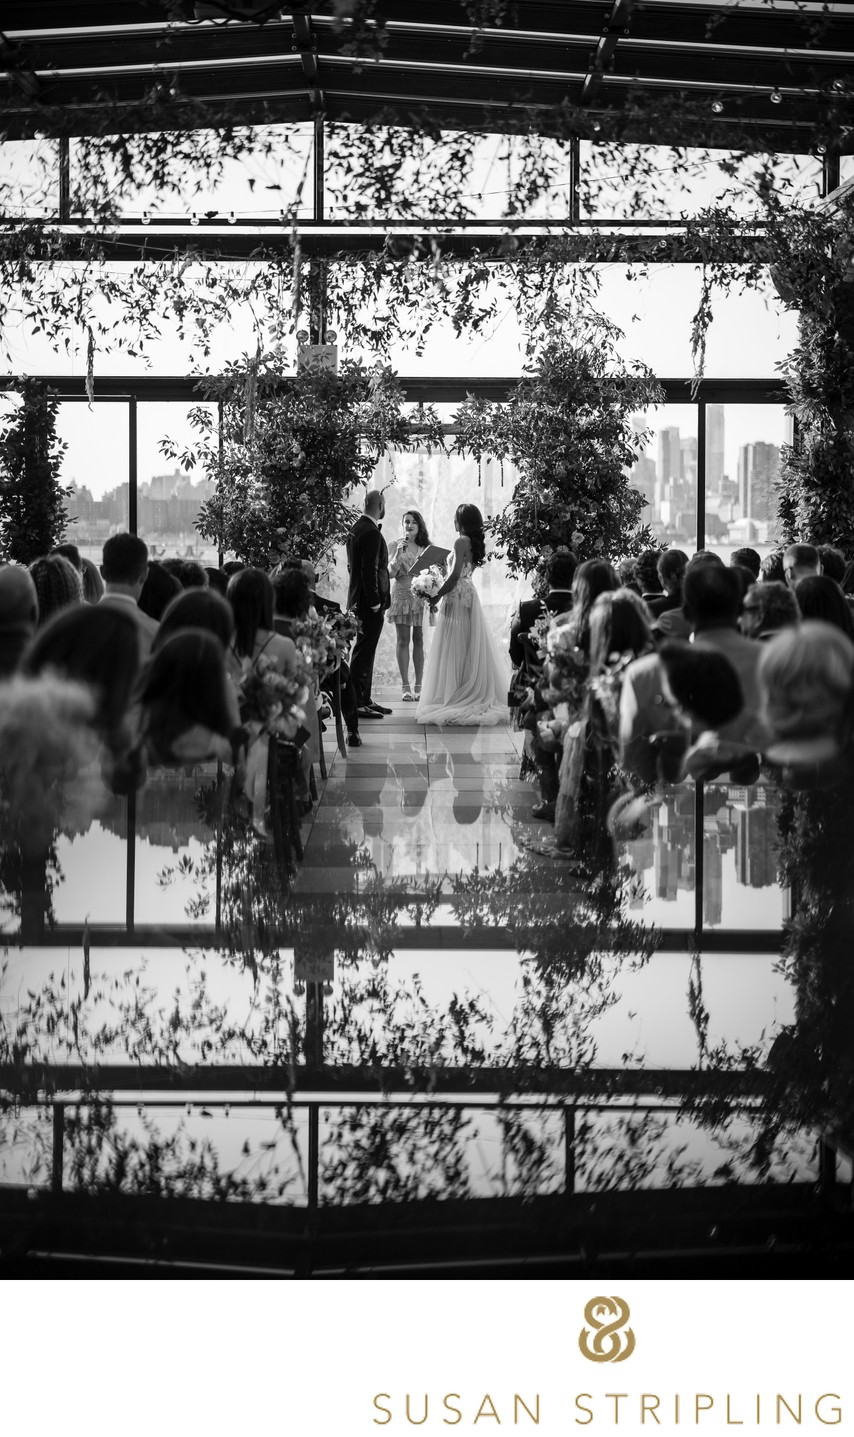 74 Wythe Wedding ceremony photo in black and white